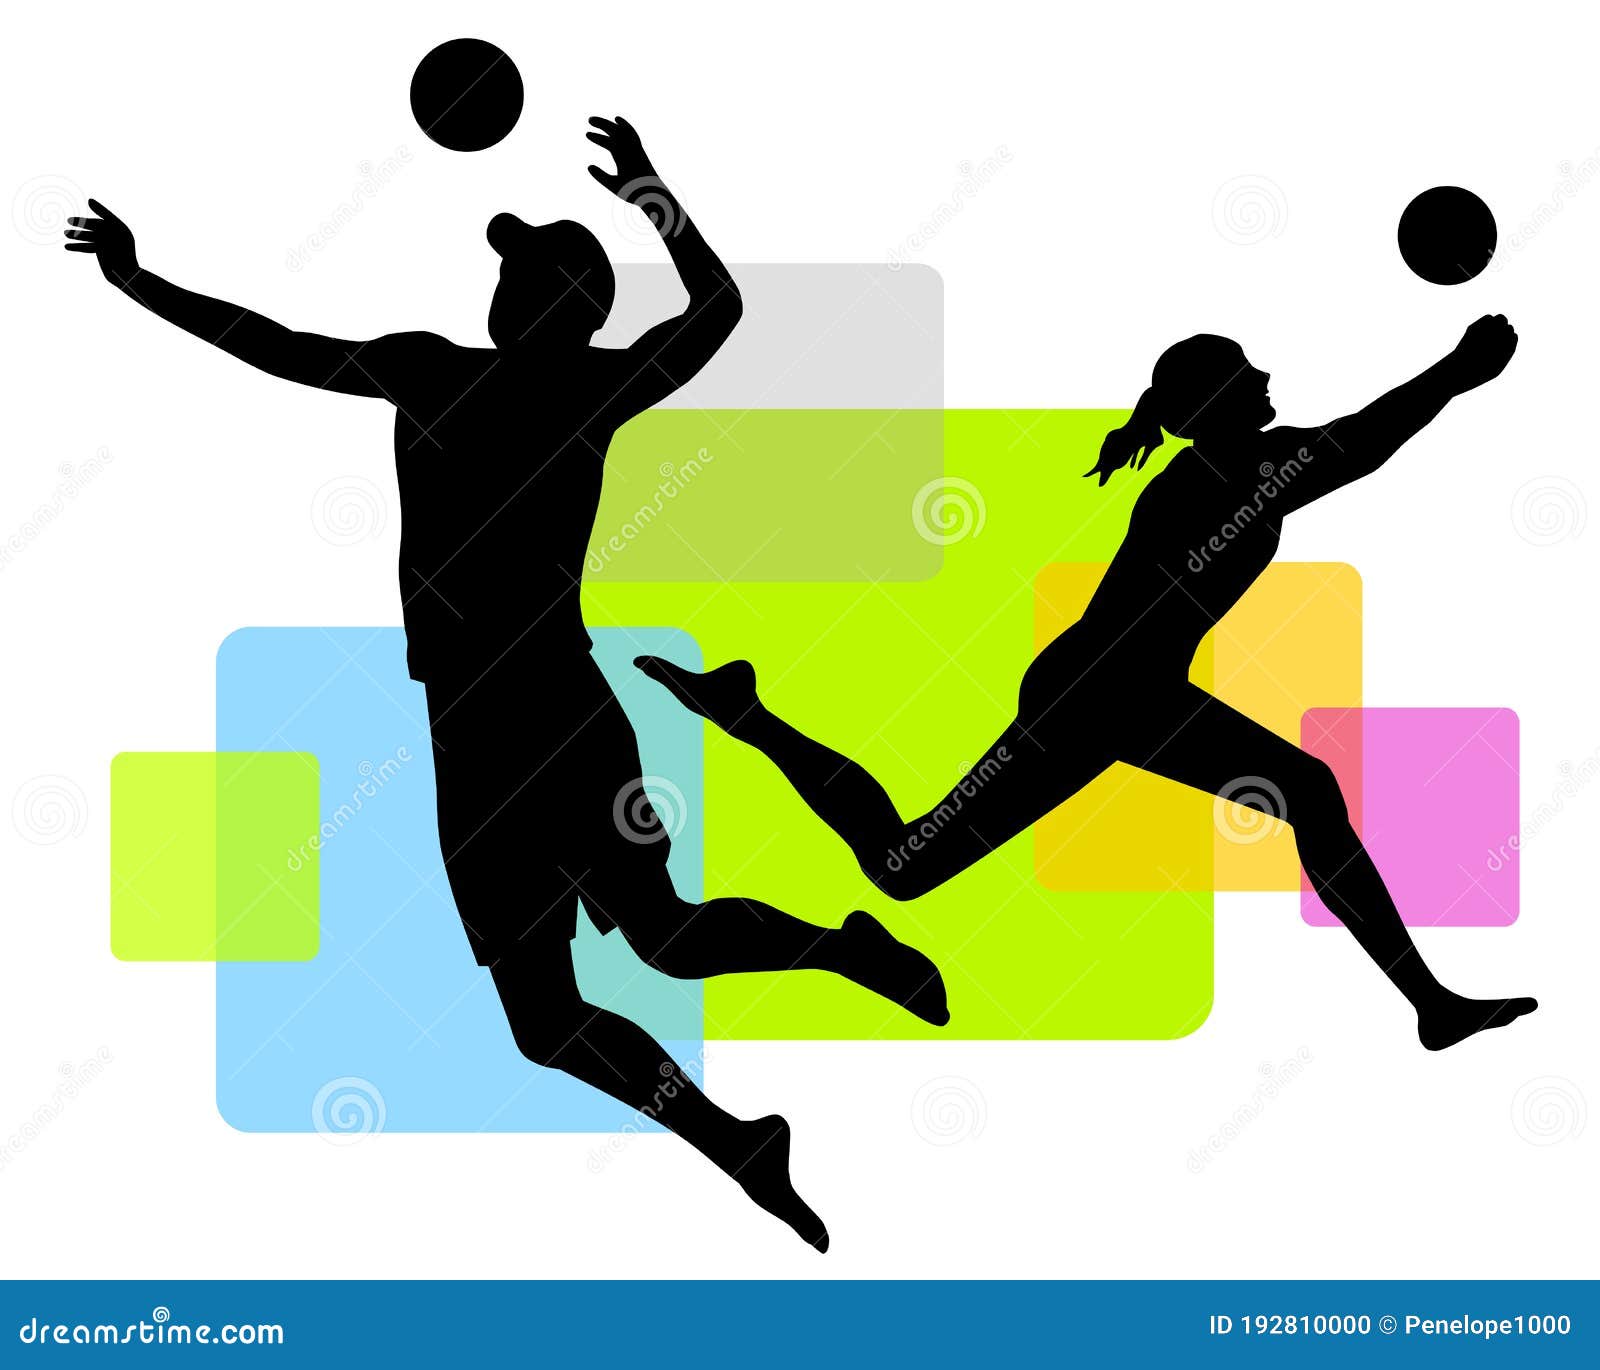 Beachvolleyball Sport Graphic in Vector Quality. Stock Vector ...